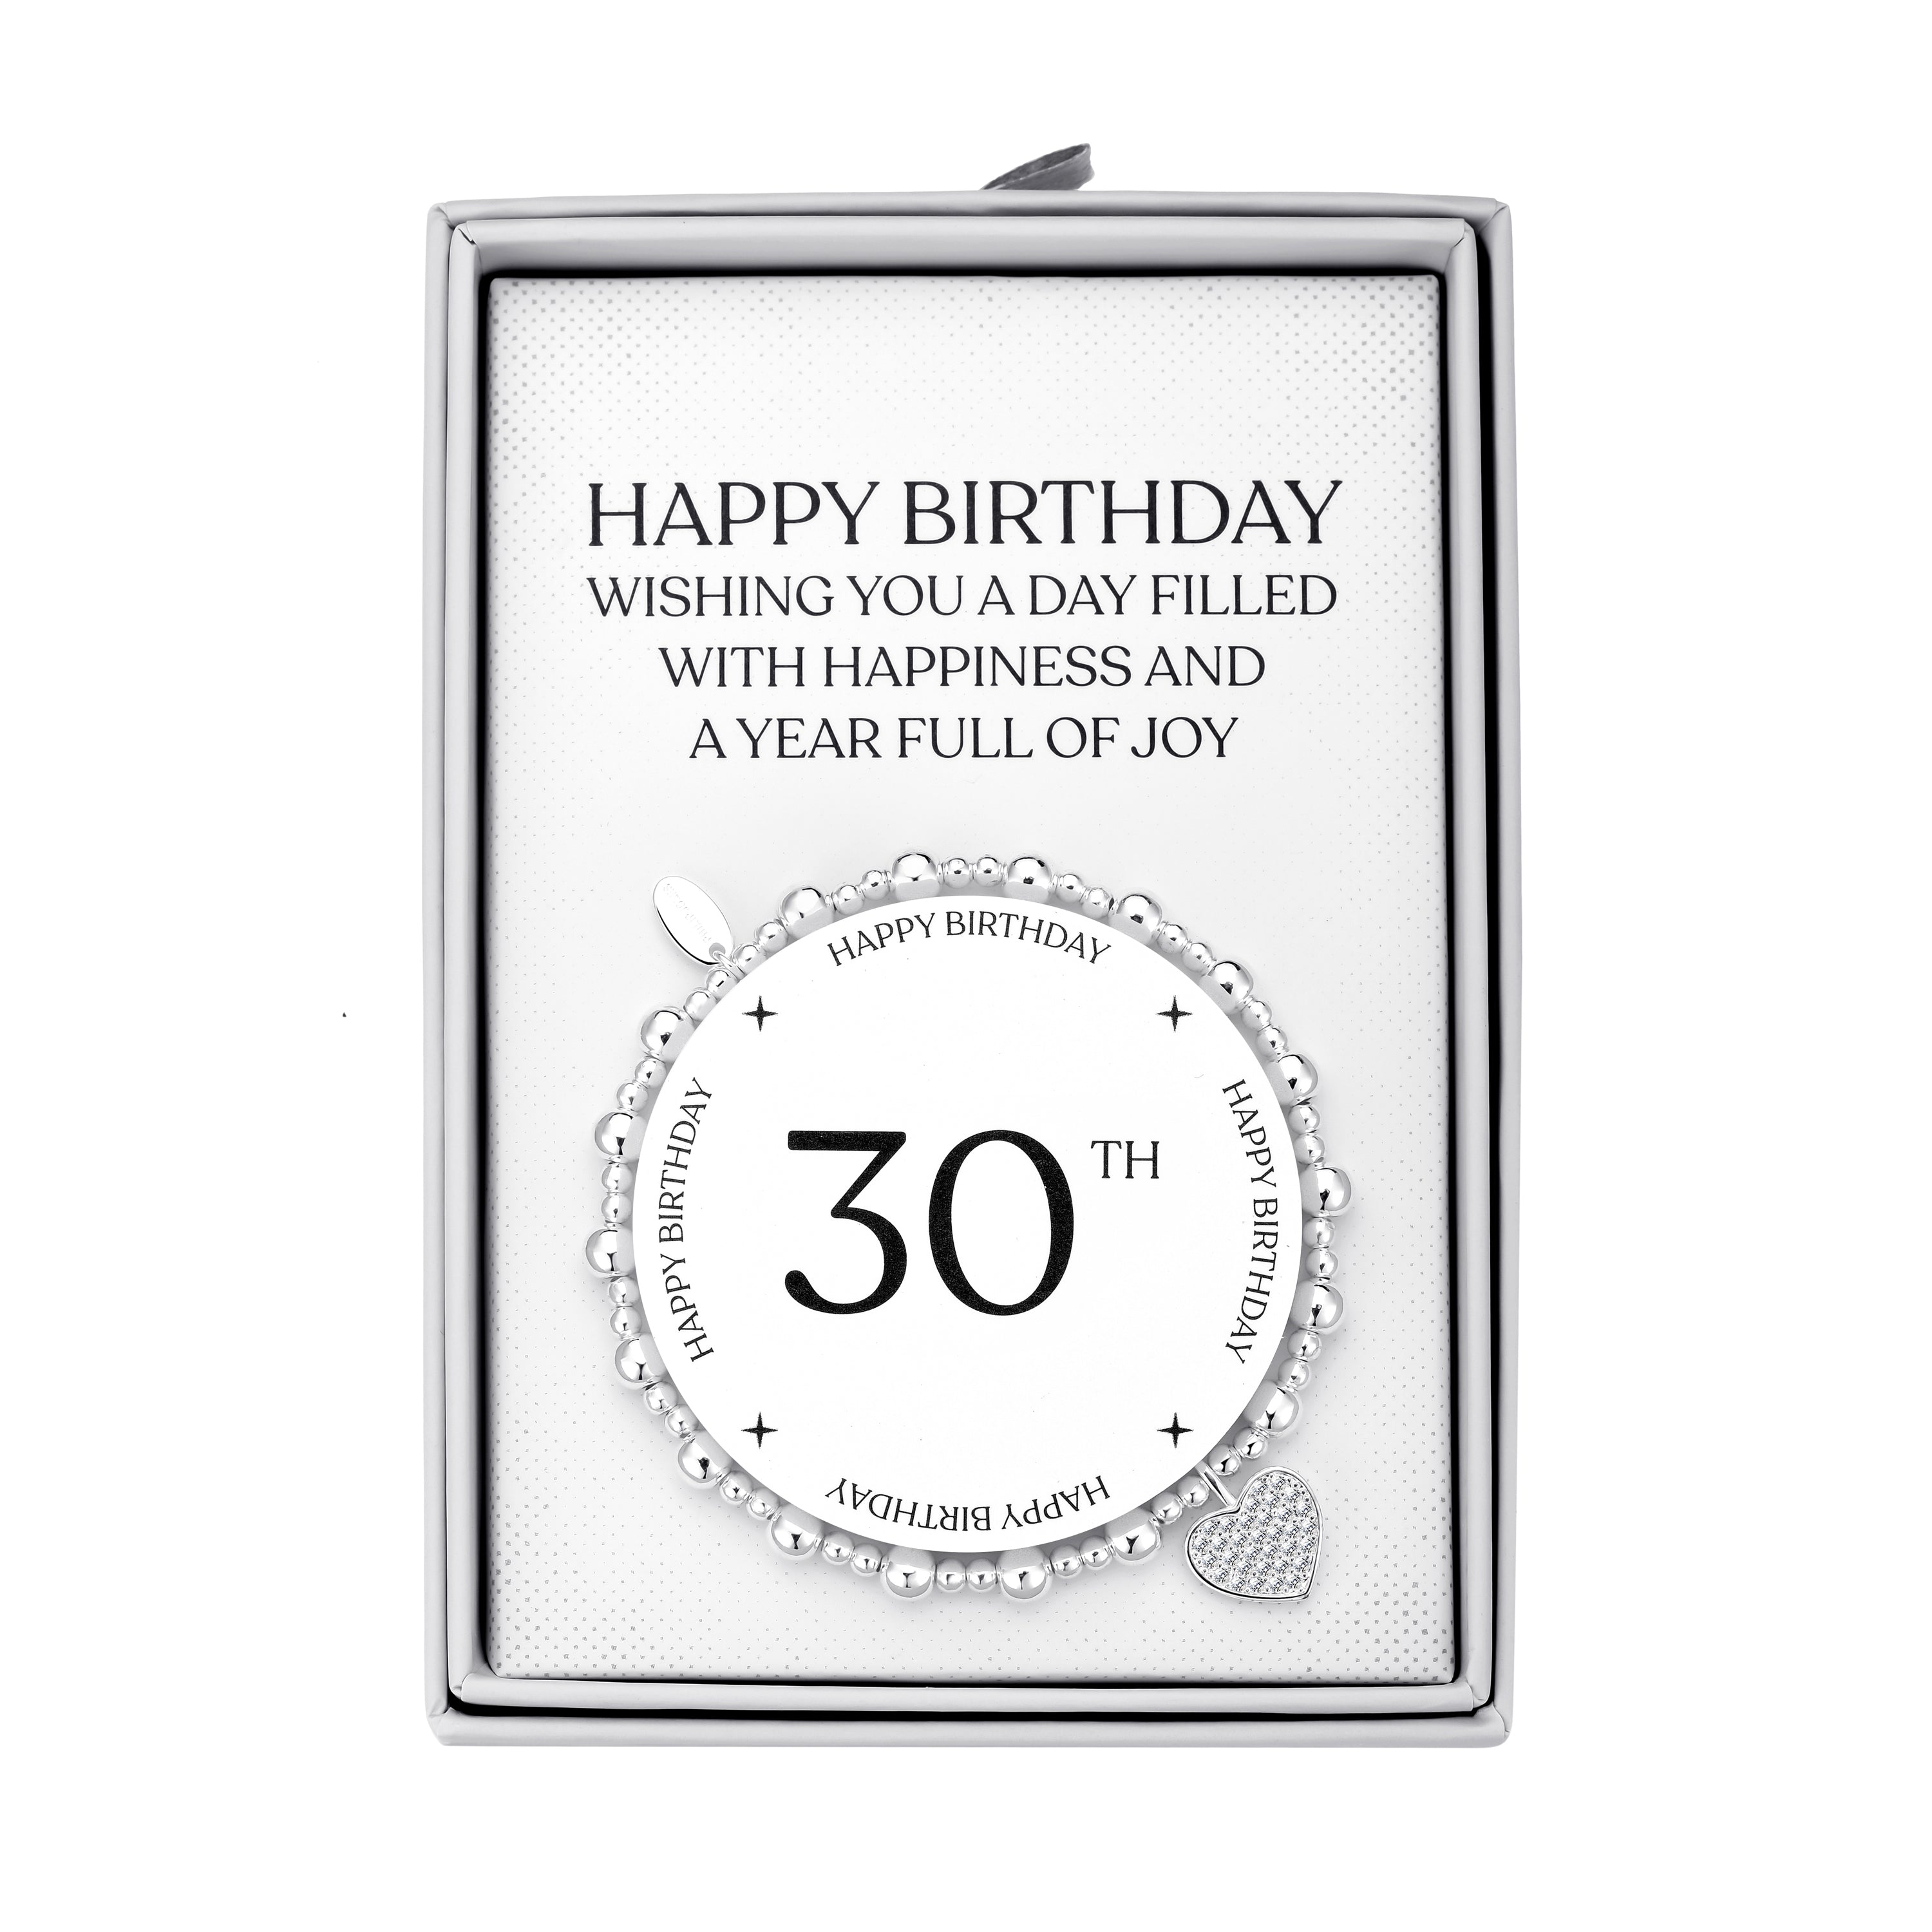 30th Birthday Heart Charm Stretch Bracelet with Quote Gift Box by Philip Jones Jewellery